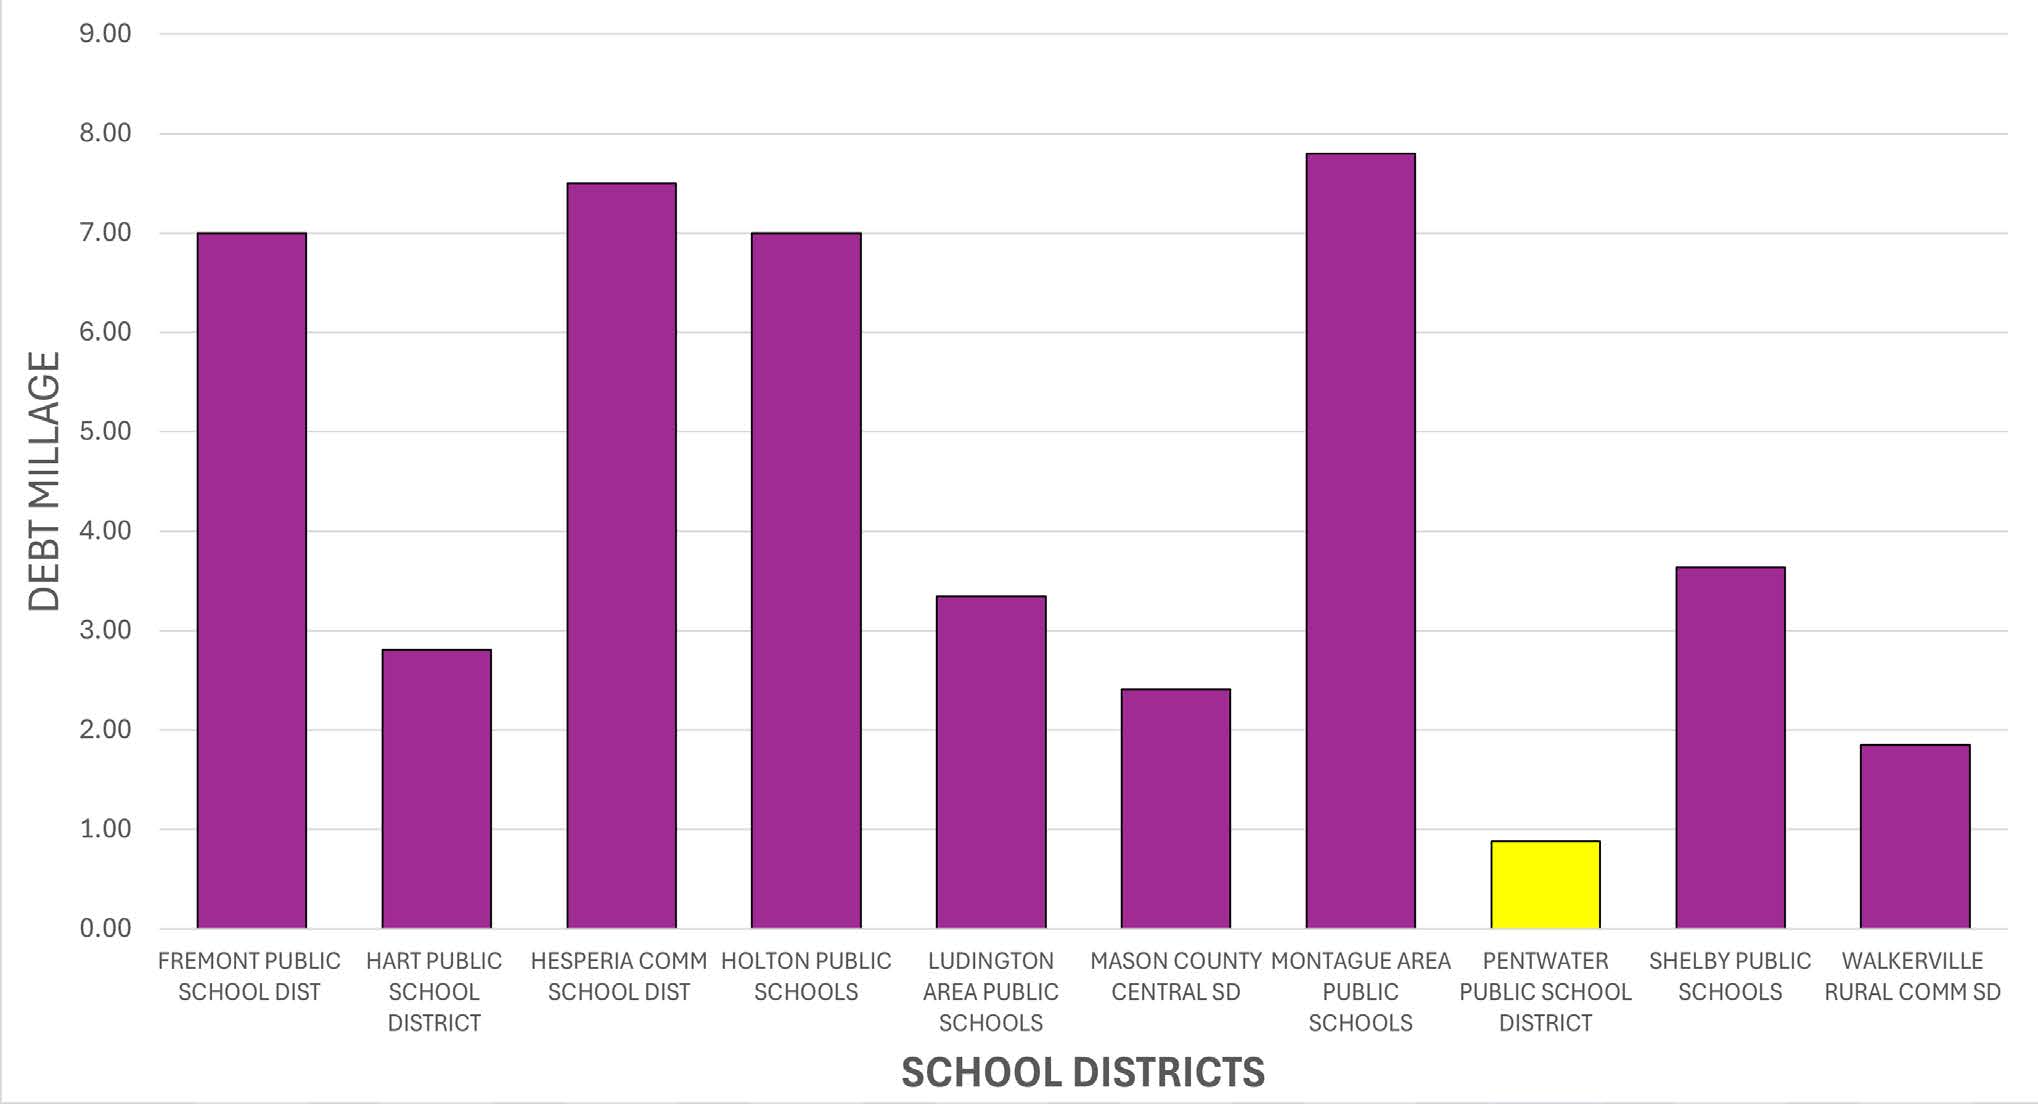 Bond Graph comparing the debt millage for neighboring districts against Pentwaters millage.